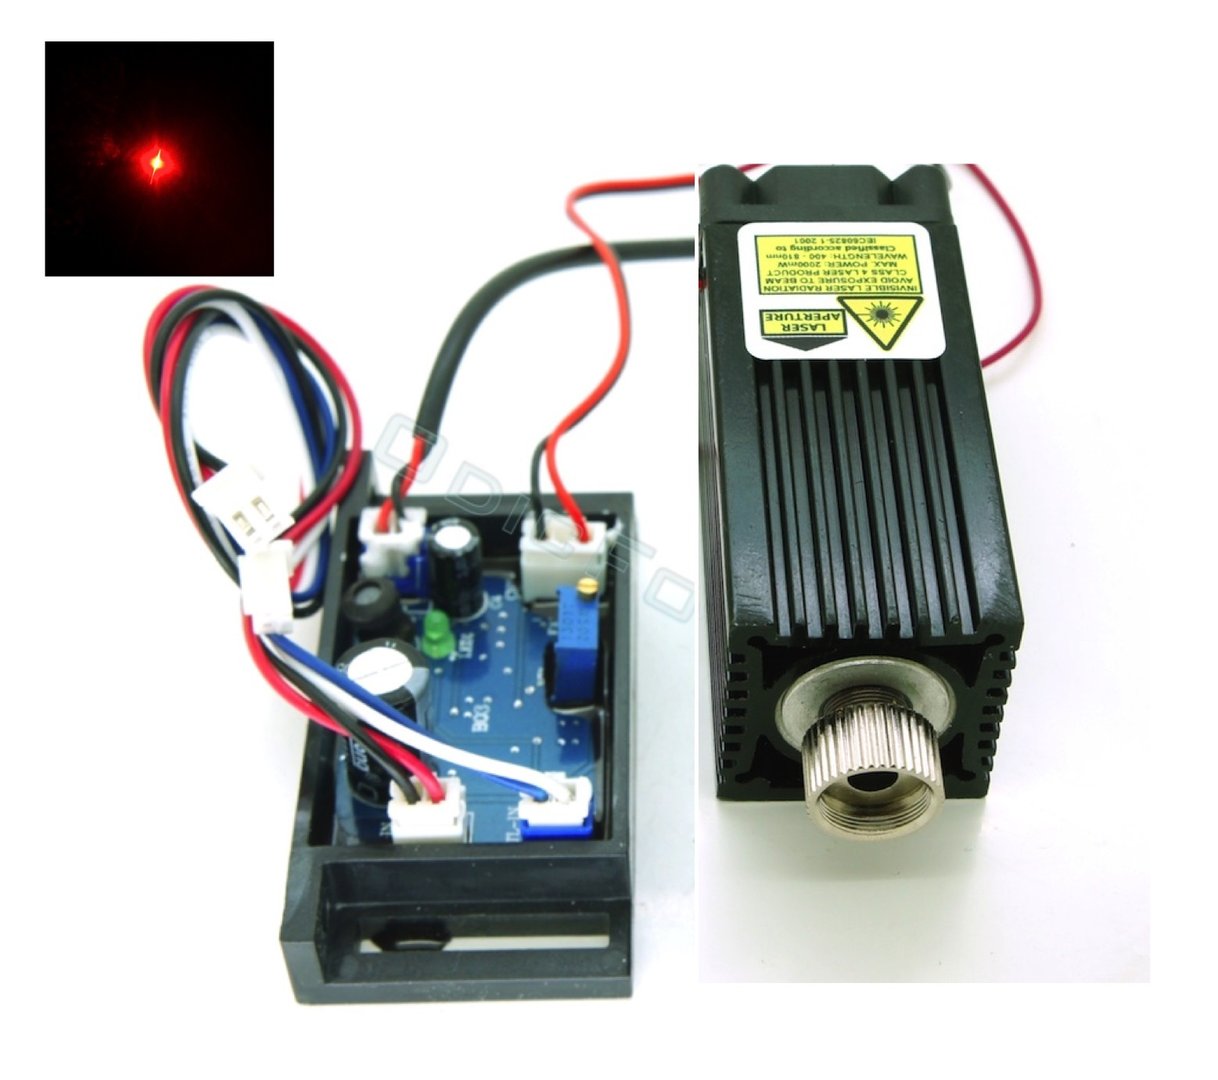 Component Bundle for 638nm (Red) 700-1000mW Laser Module with TTL and Adjustable Focus